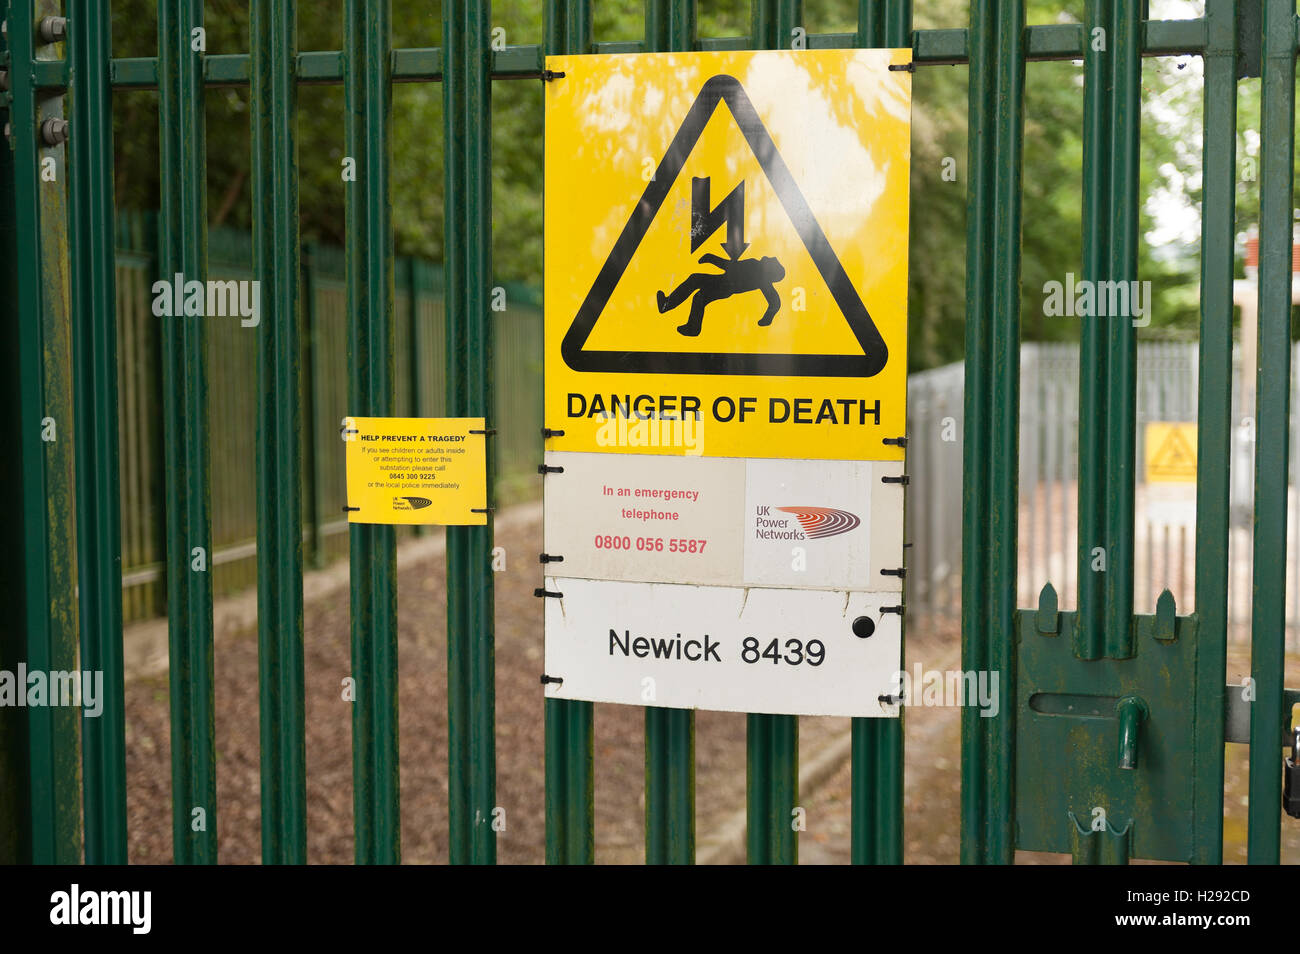 strong metallic metal wall fence keeping public out away from mains electricity substation 33000 volts danger of death Stock Photo